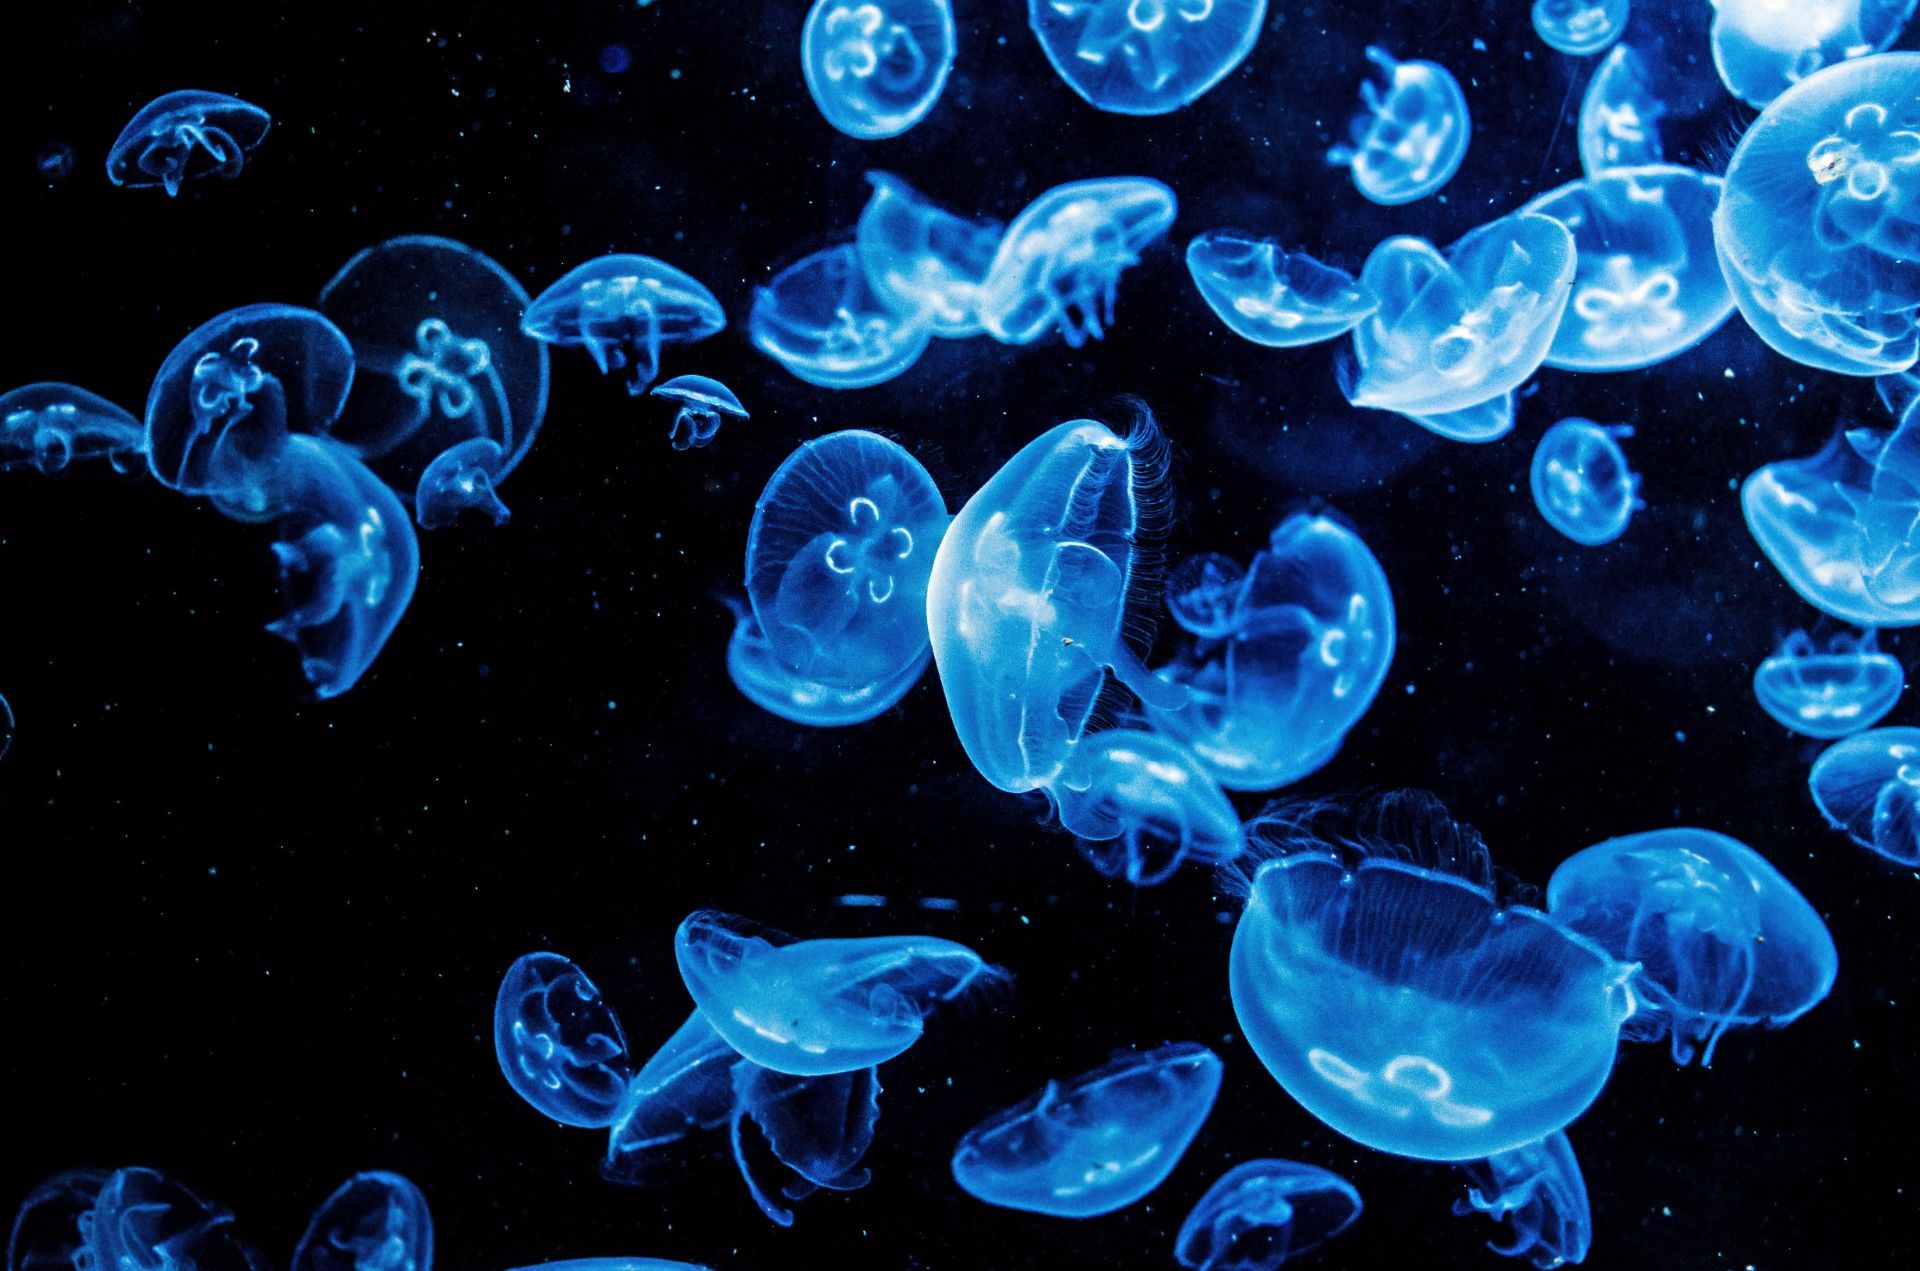 A group of jellyfish swimming in the ocean - Jellyfish